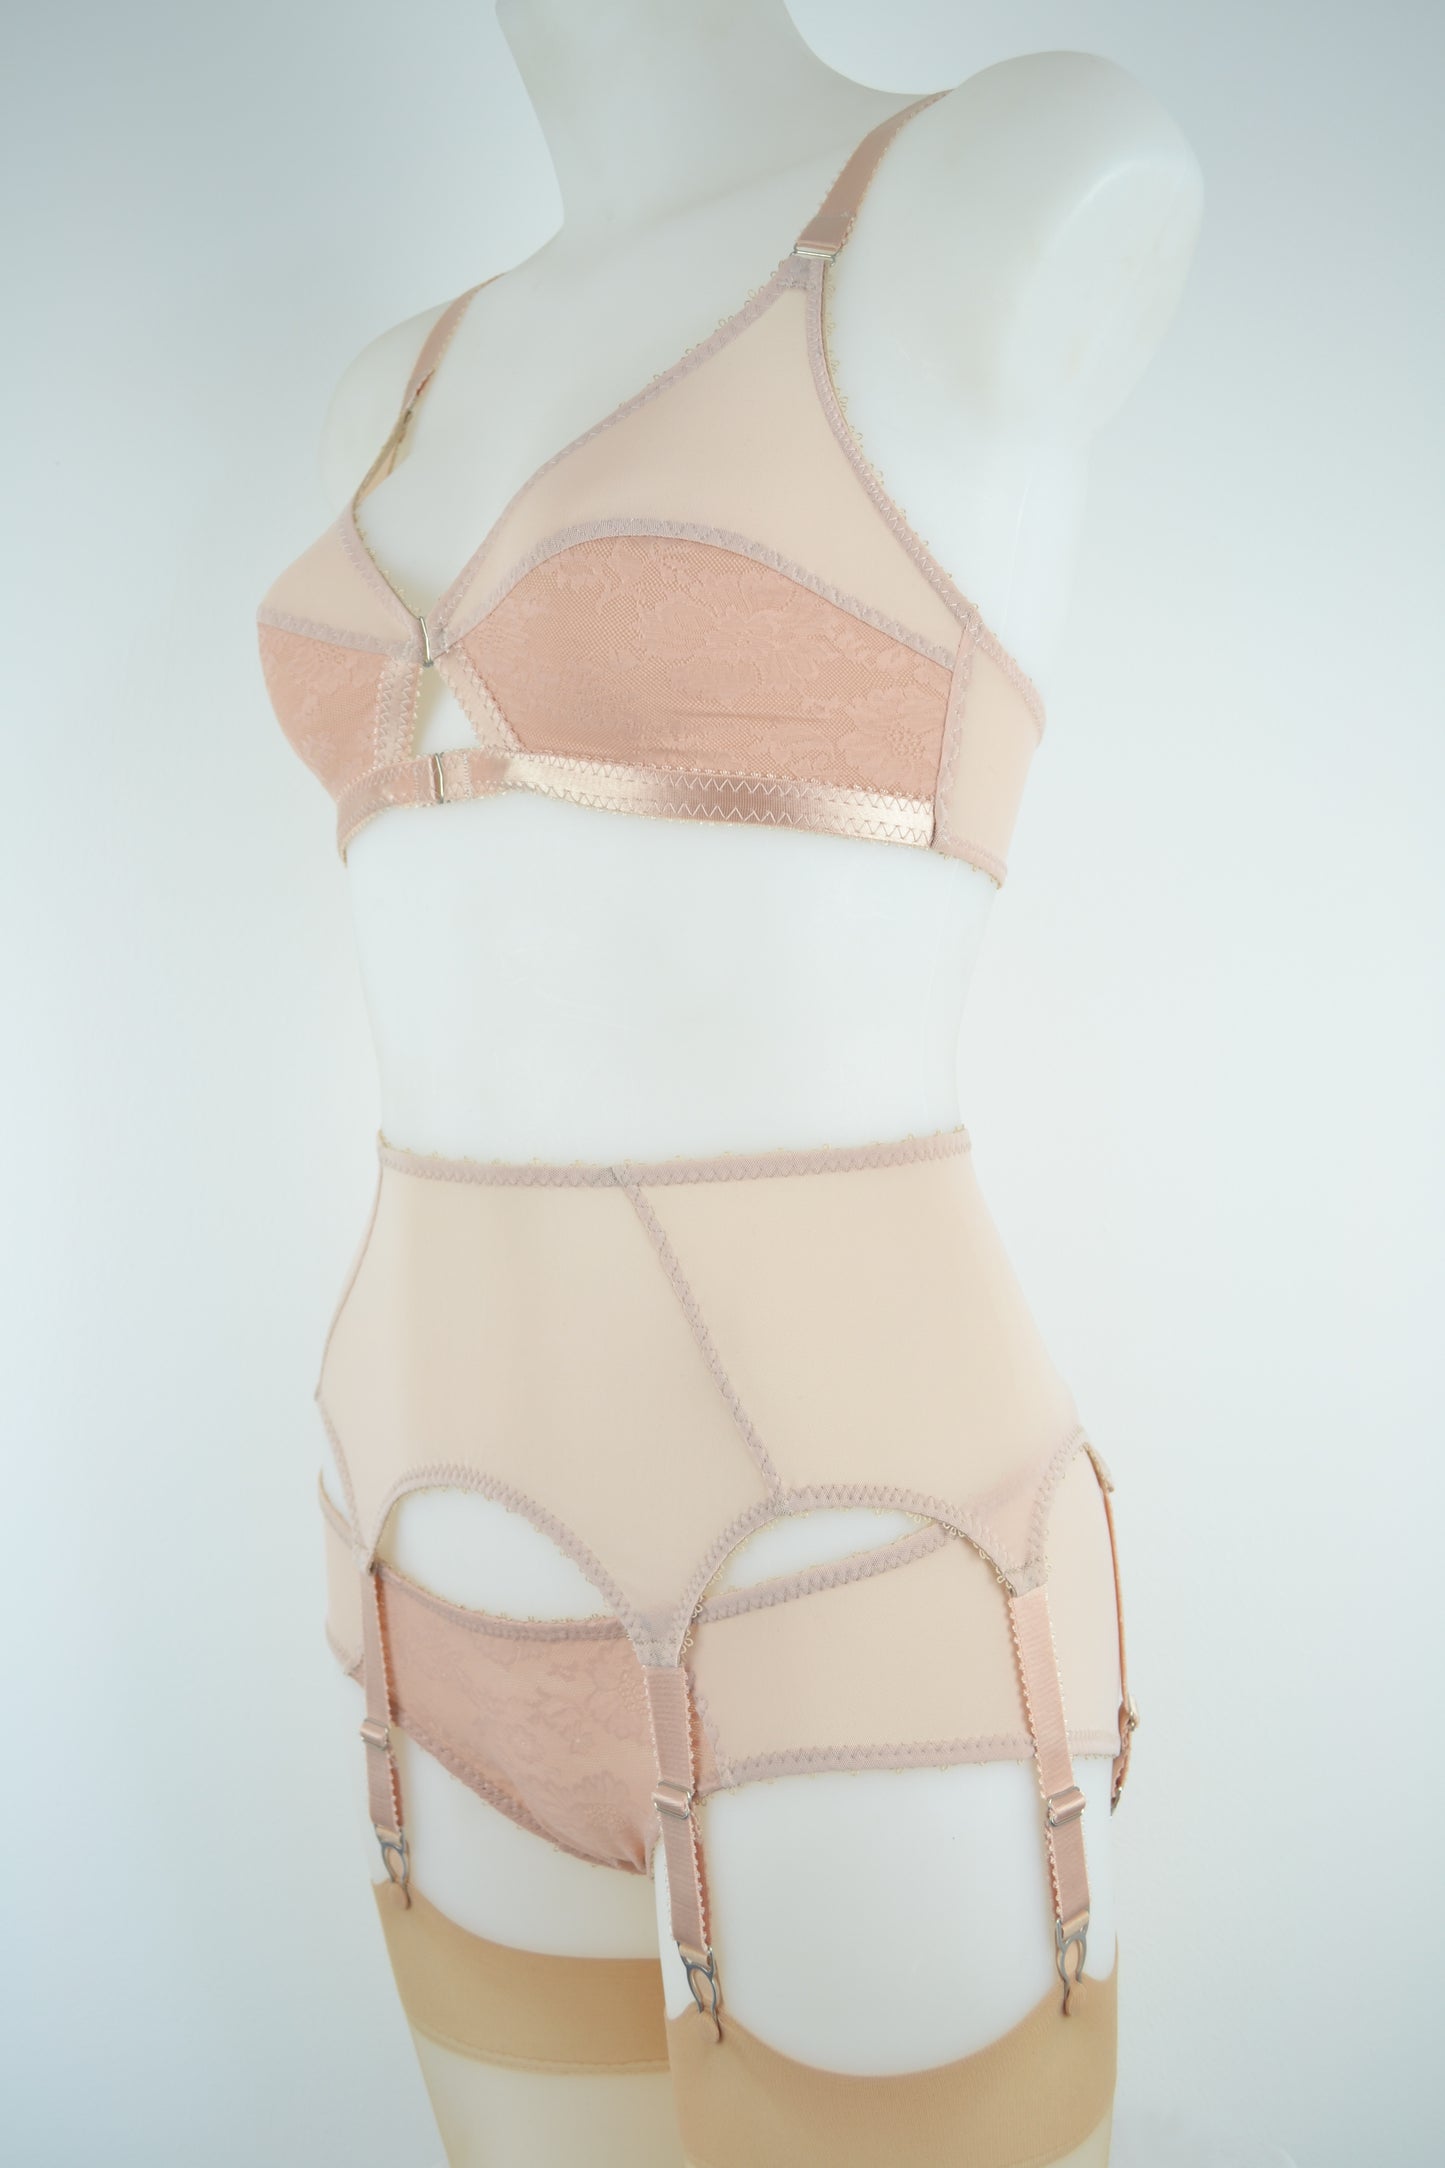 sheer biscotti mesh 6 strap suspender garter belt plus size retro and vintage inspired lingerie by PIP AND PANTALAIMON made in the uk